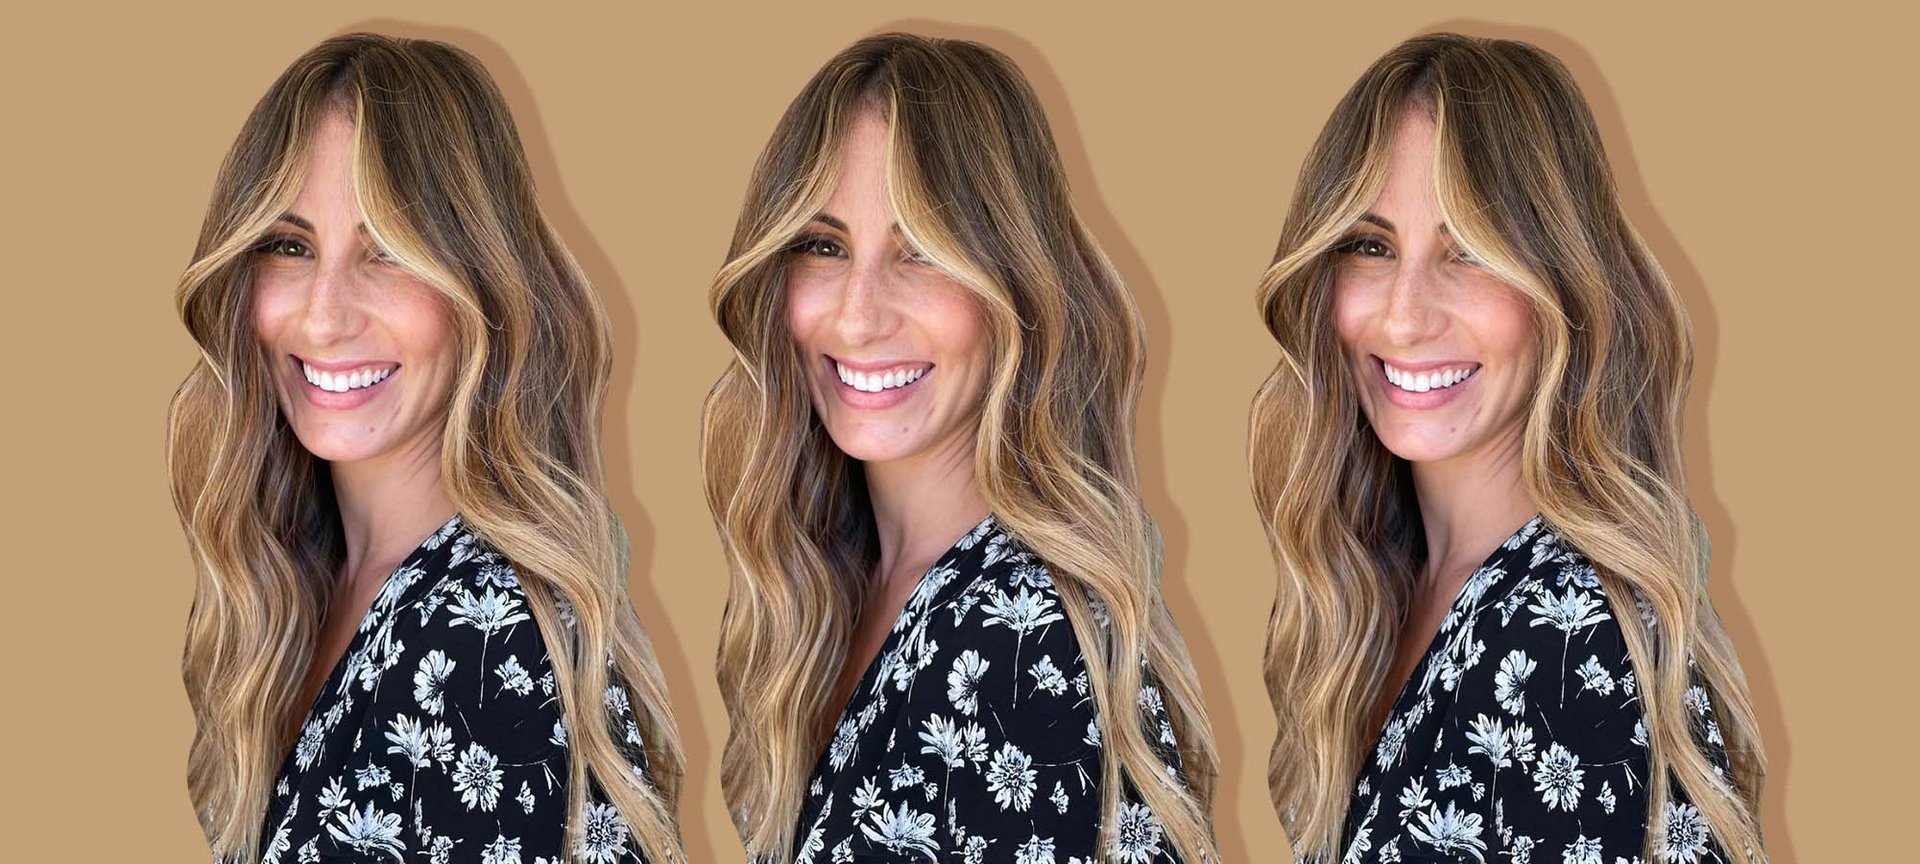 How to Spice Up Your Hair Color With Golden Halo Highlights - L'Oréal Paris